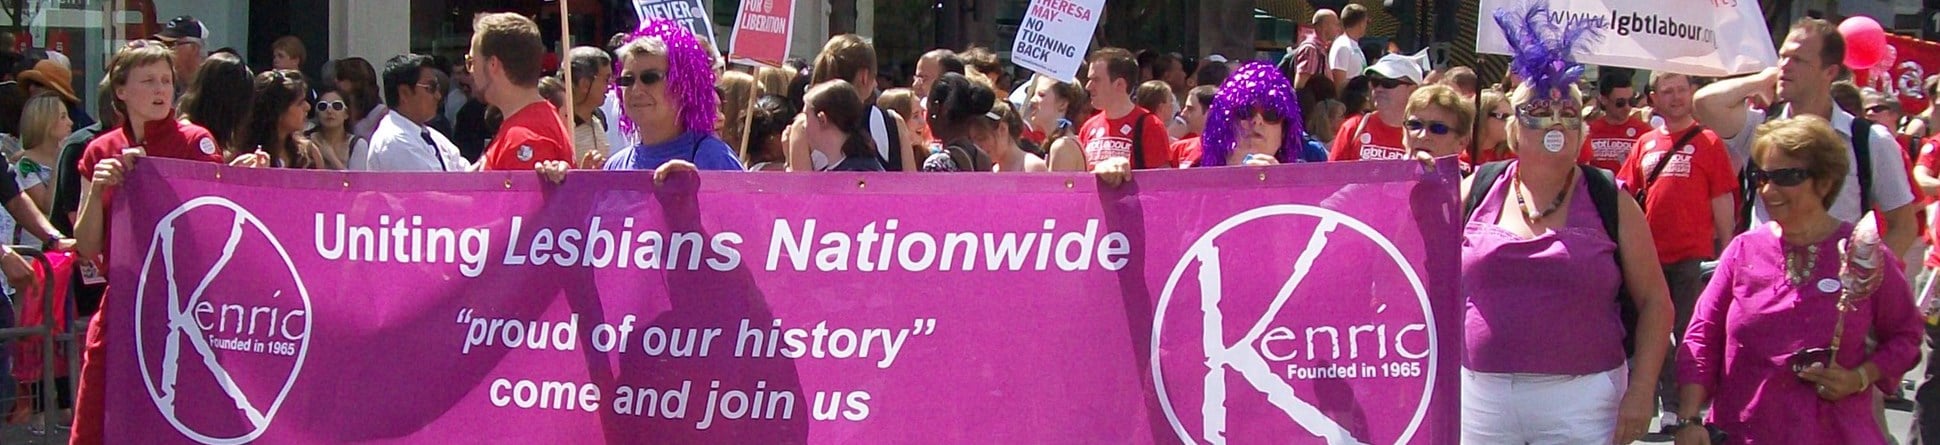 Marchers carrying Kenric banner with wording: 
Uniting Lesbians Nationwide
"proud of our history"
come and join us
www.kenric.org.uk